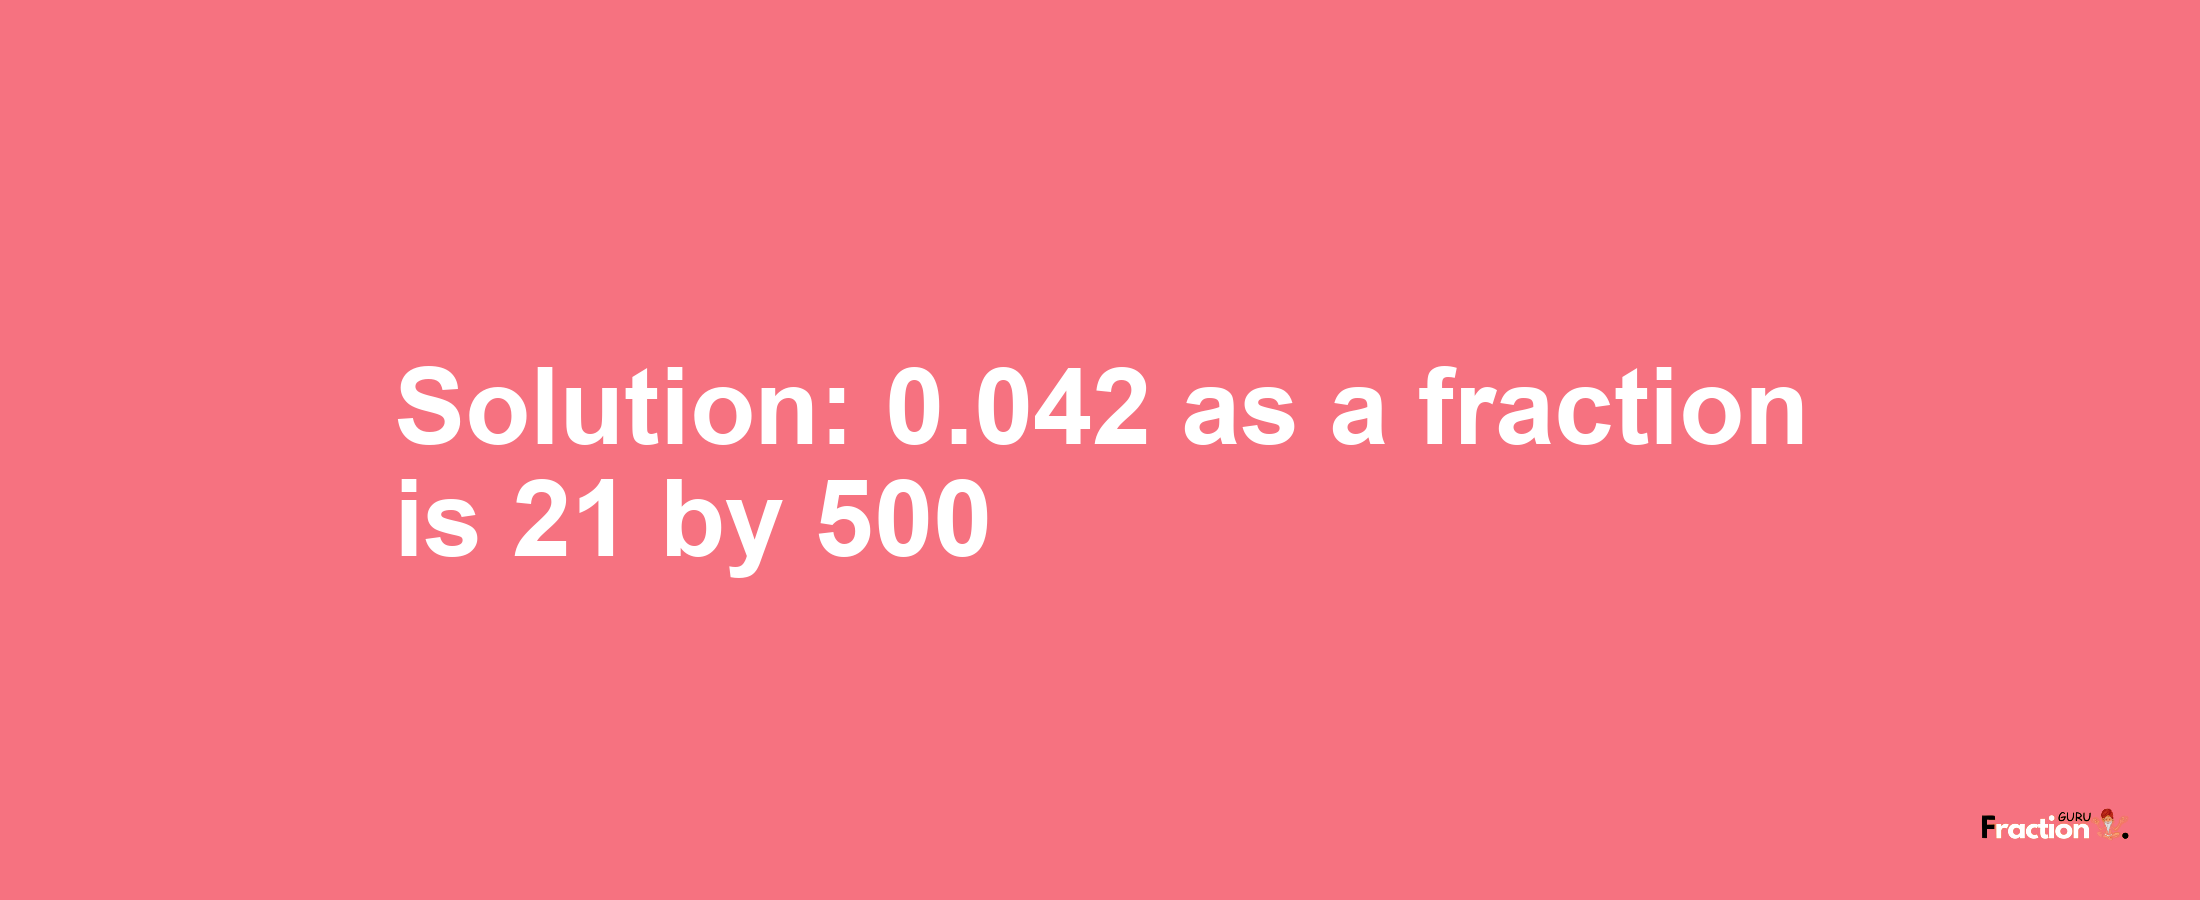 Solution:0.042 as a fraction is 21/500